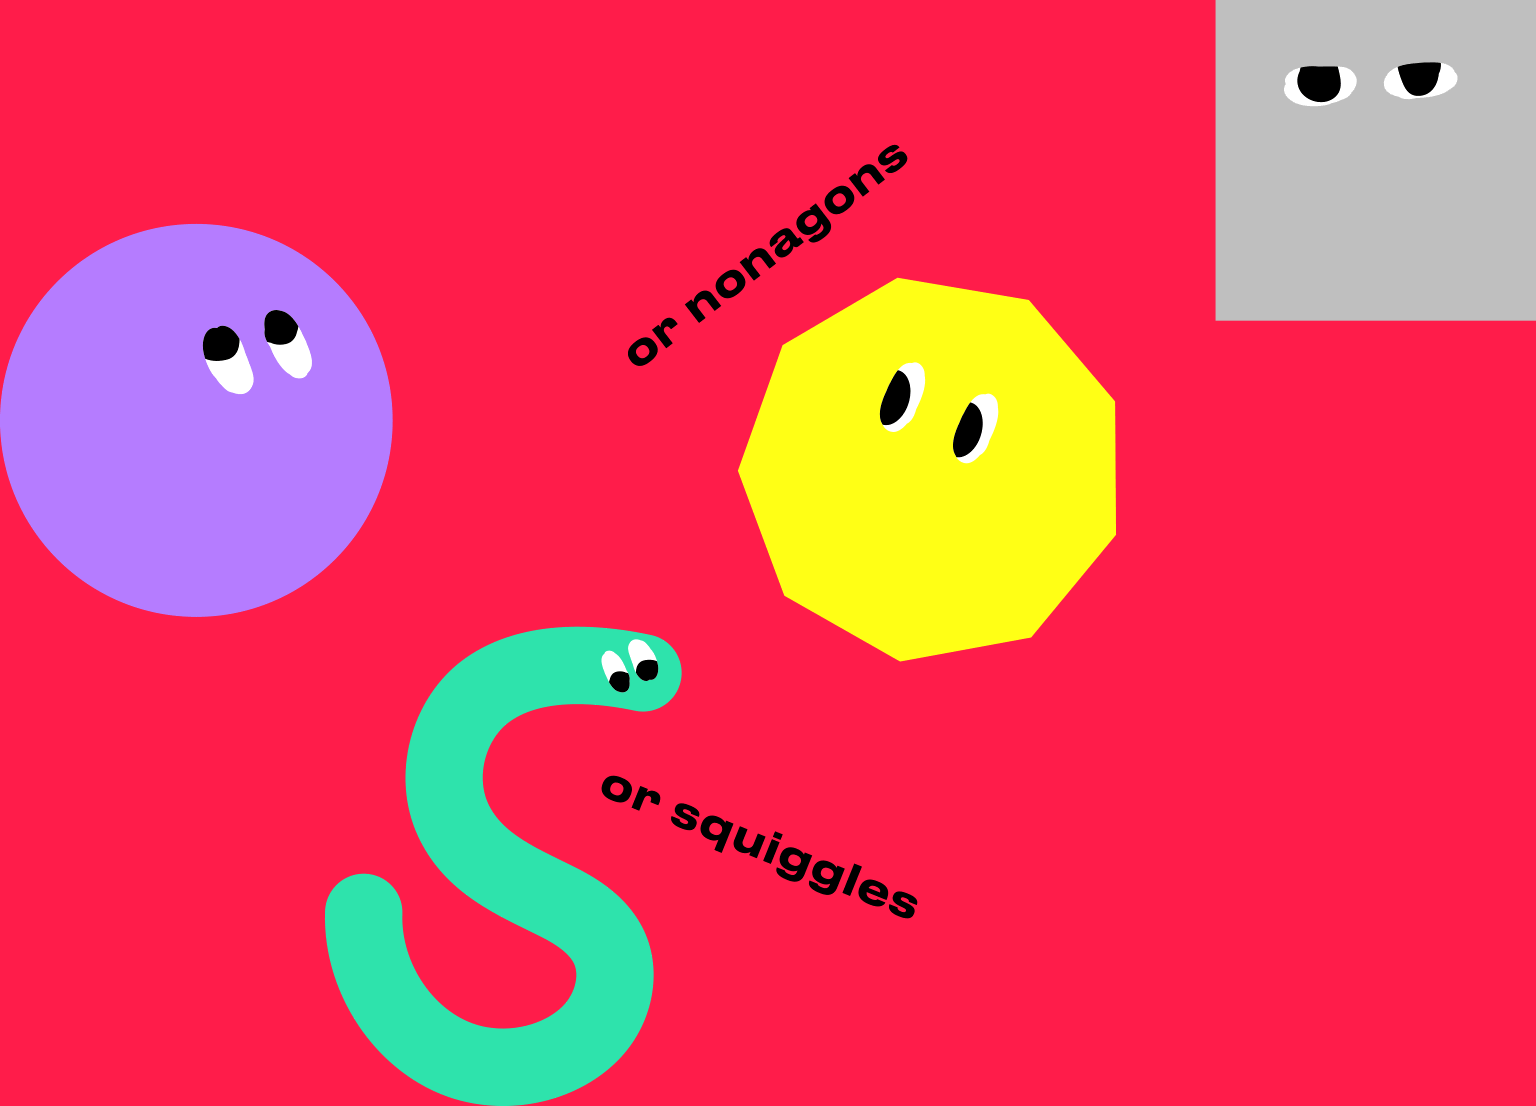 or nonagons, or squiggles